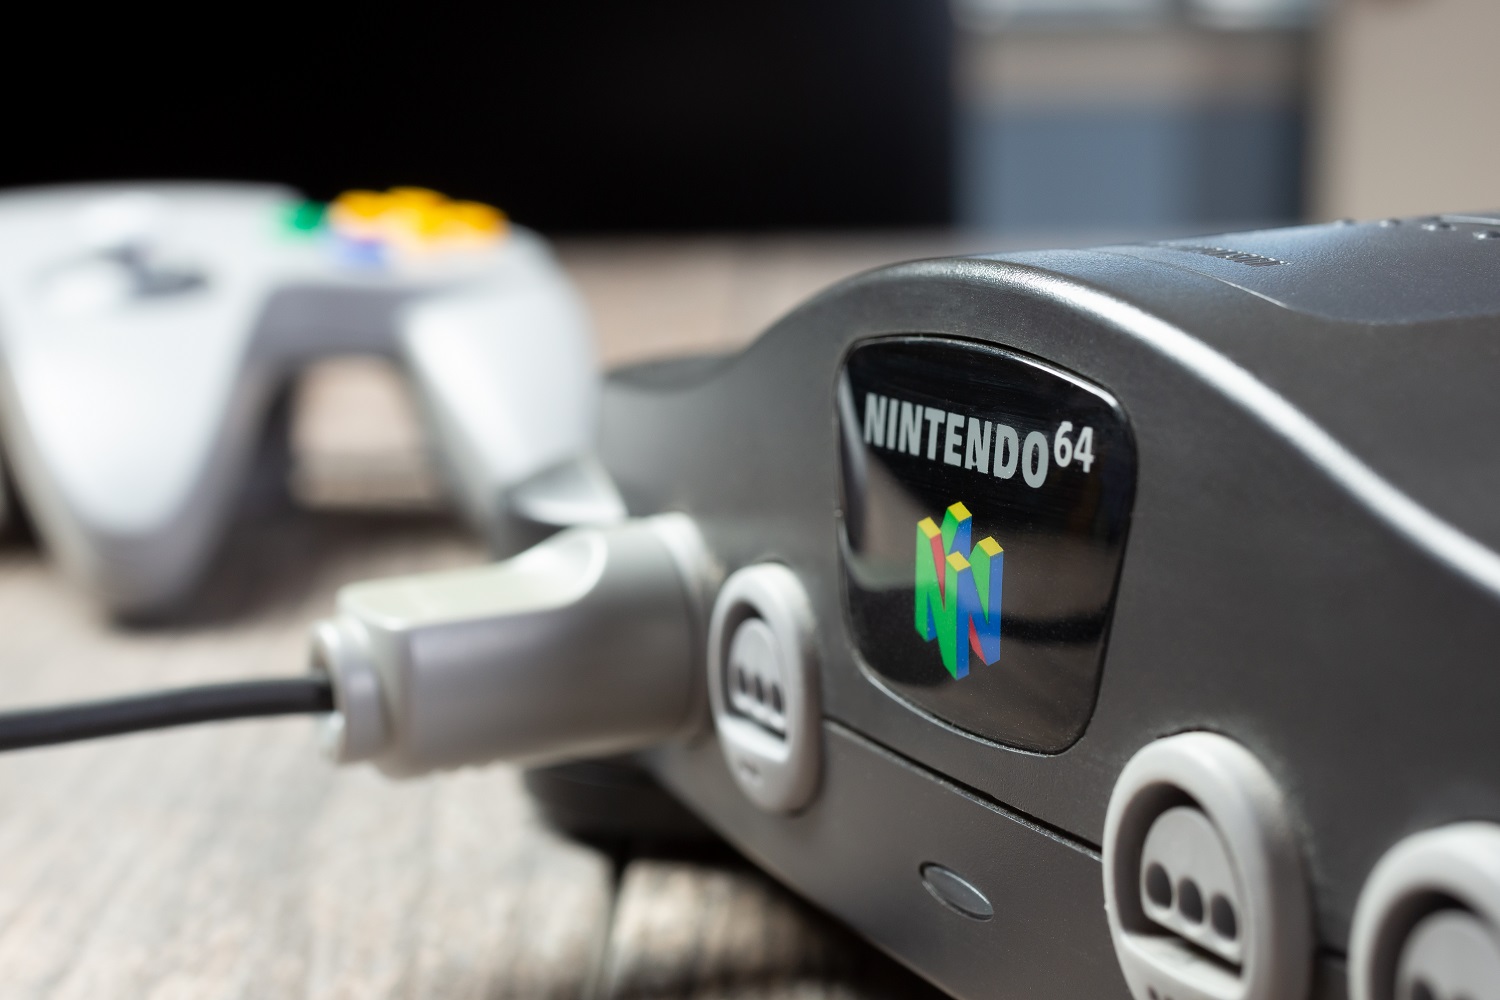 The Analogue 3D can play Nintendo 64 games in 4K